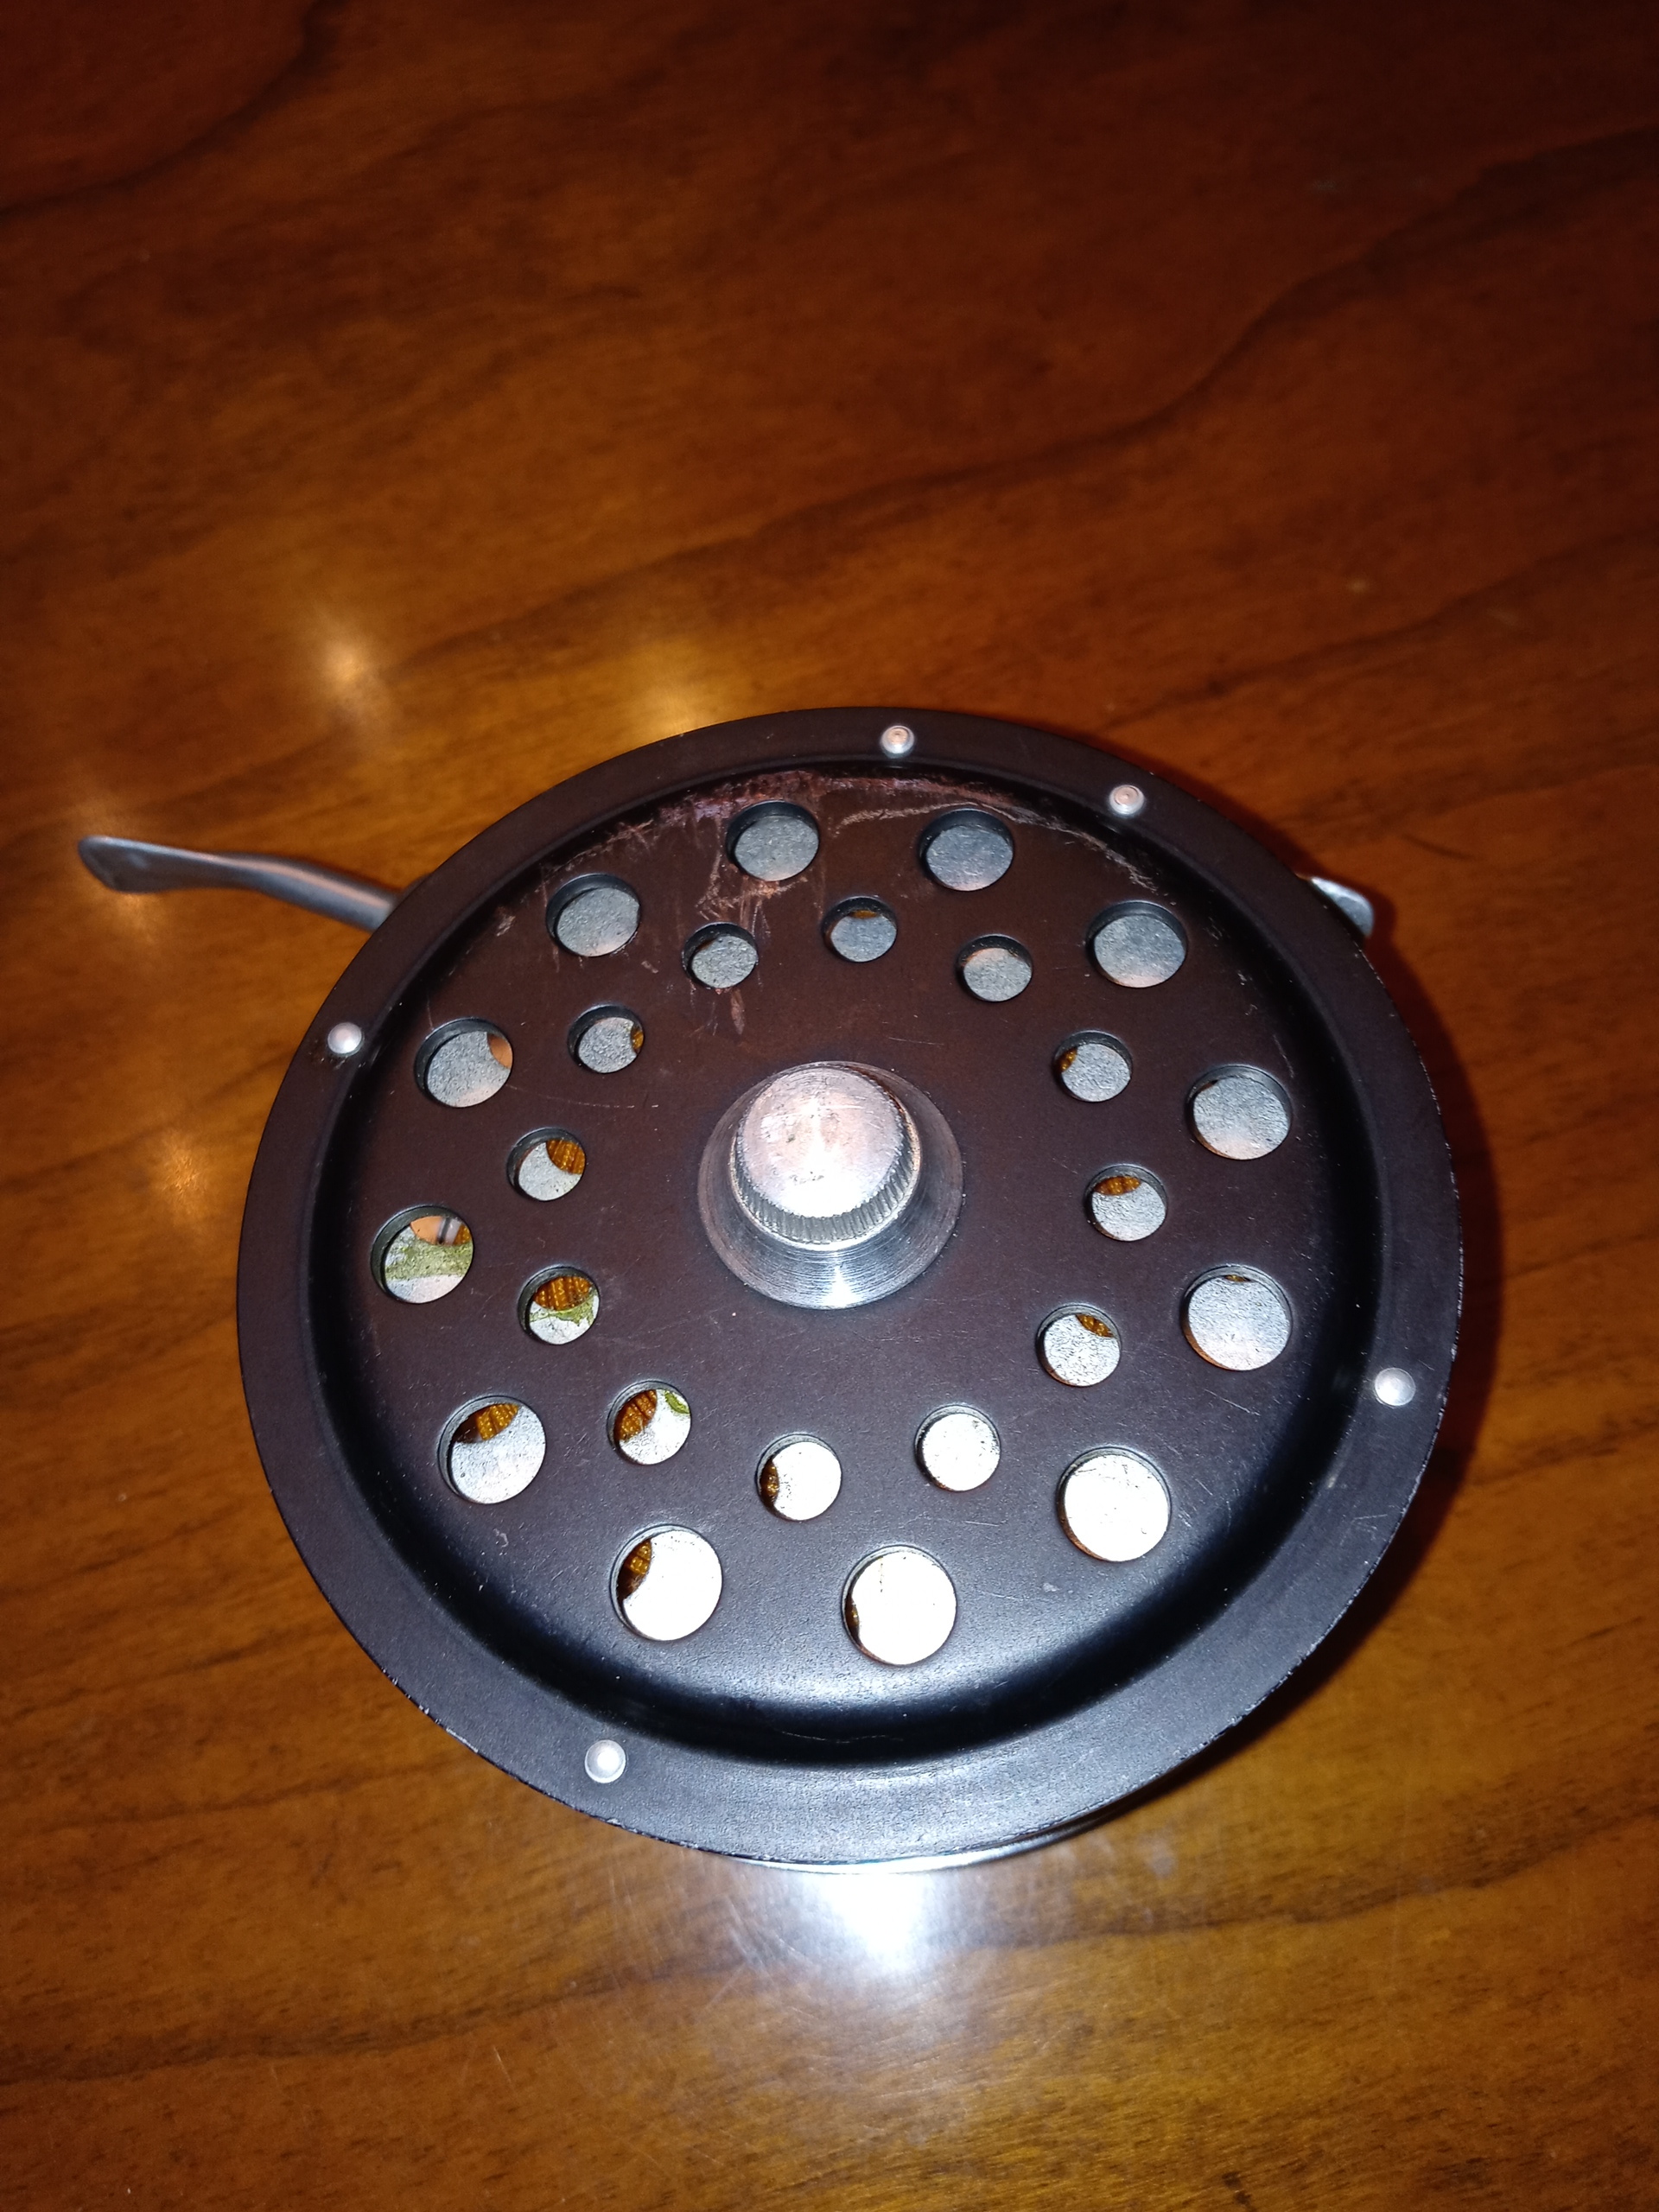 Best of the best vintage automatic fly reels